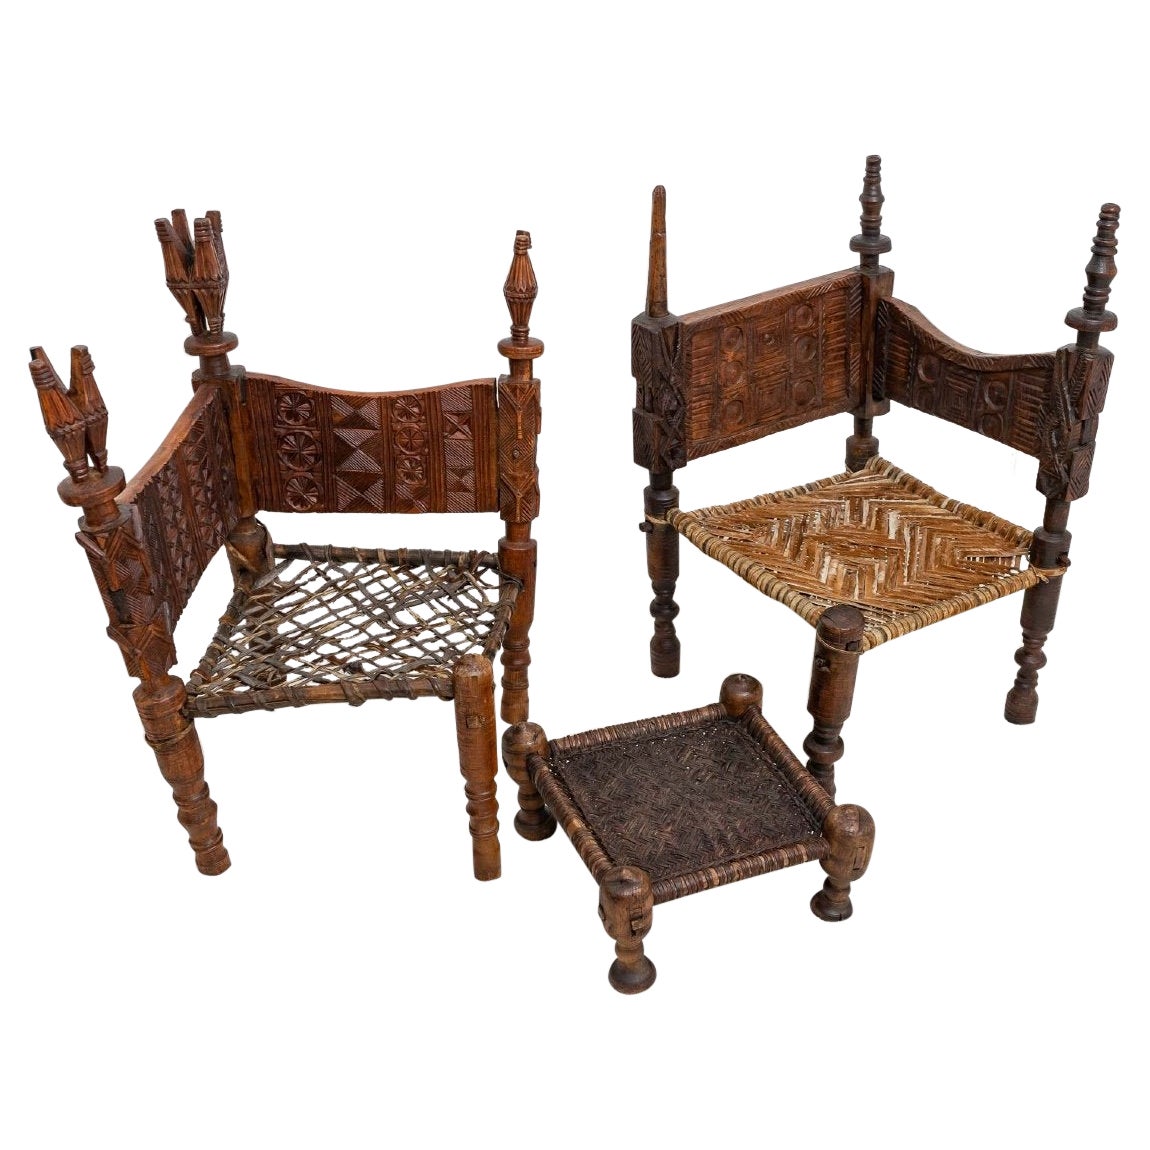 Corner Or Corner Chairs And Footrest From Nuristan Afghanistan/pakistan - XIXth For Sale